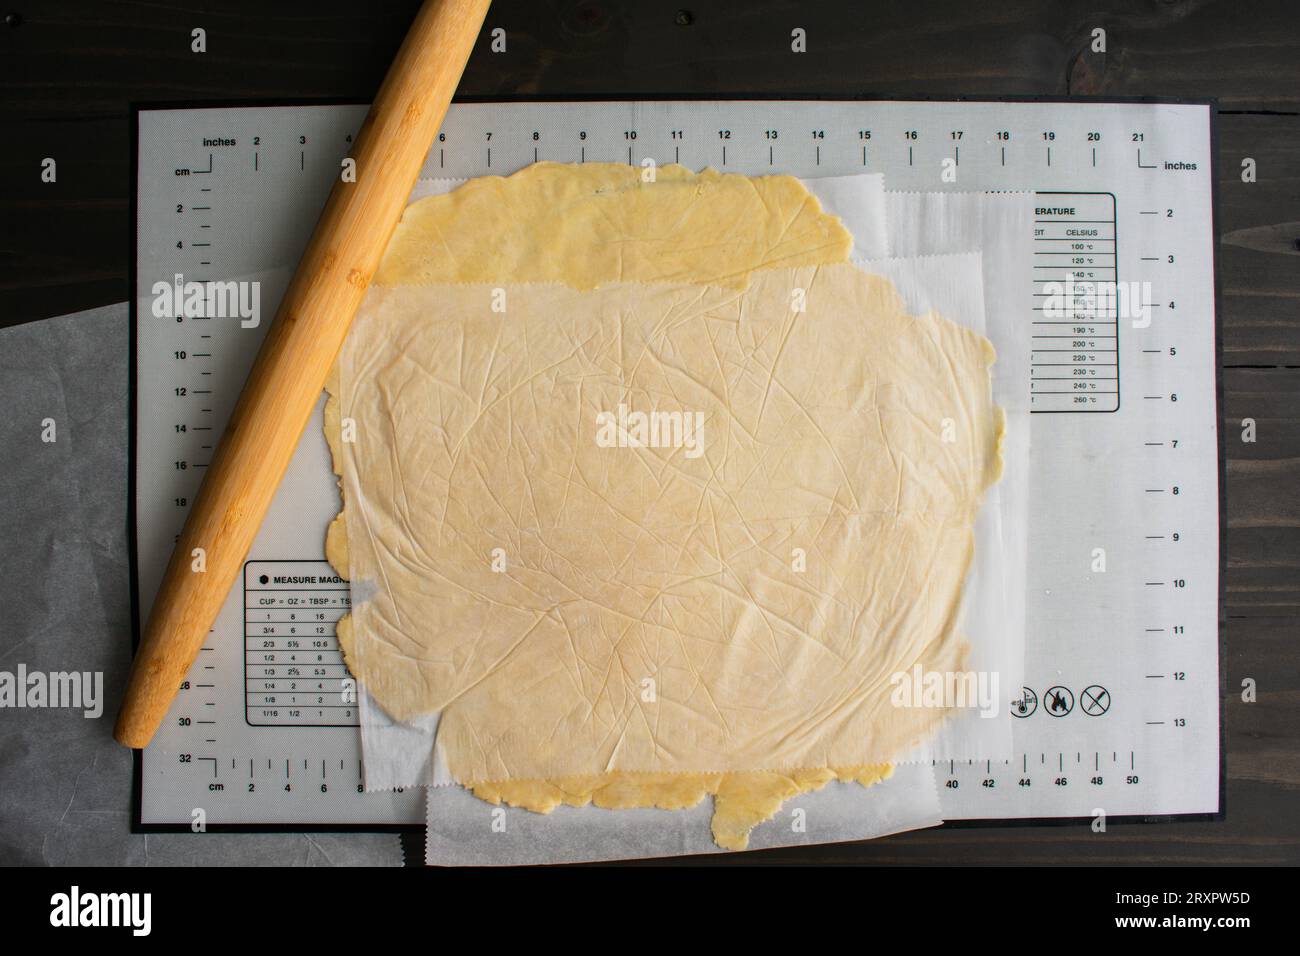 Rolling Out Pie Dough Between Sheets of Parchment Paper: Pie dough rolled out with a bamboo French rolling pin on a silicone mat Stock Photo